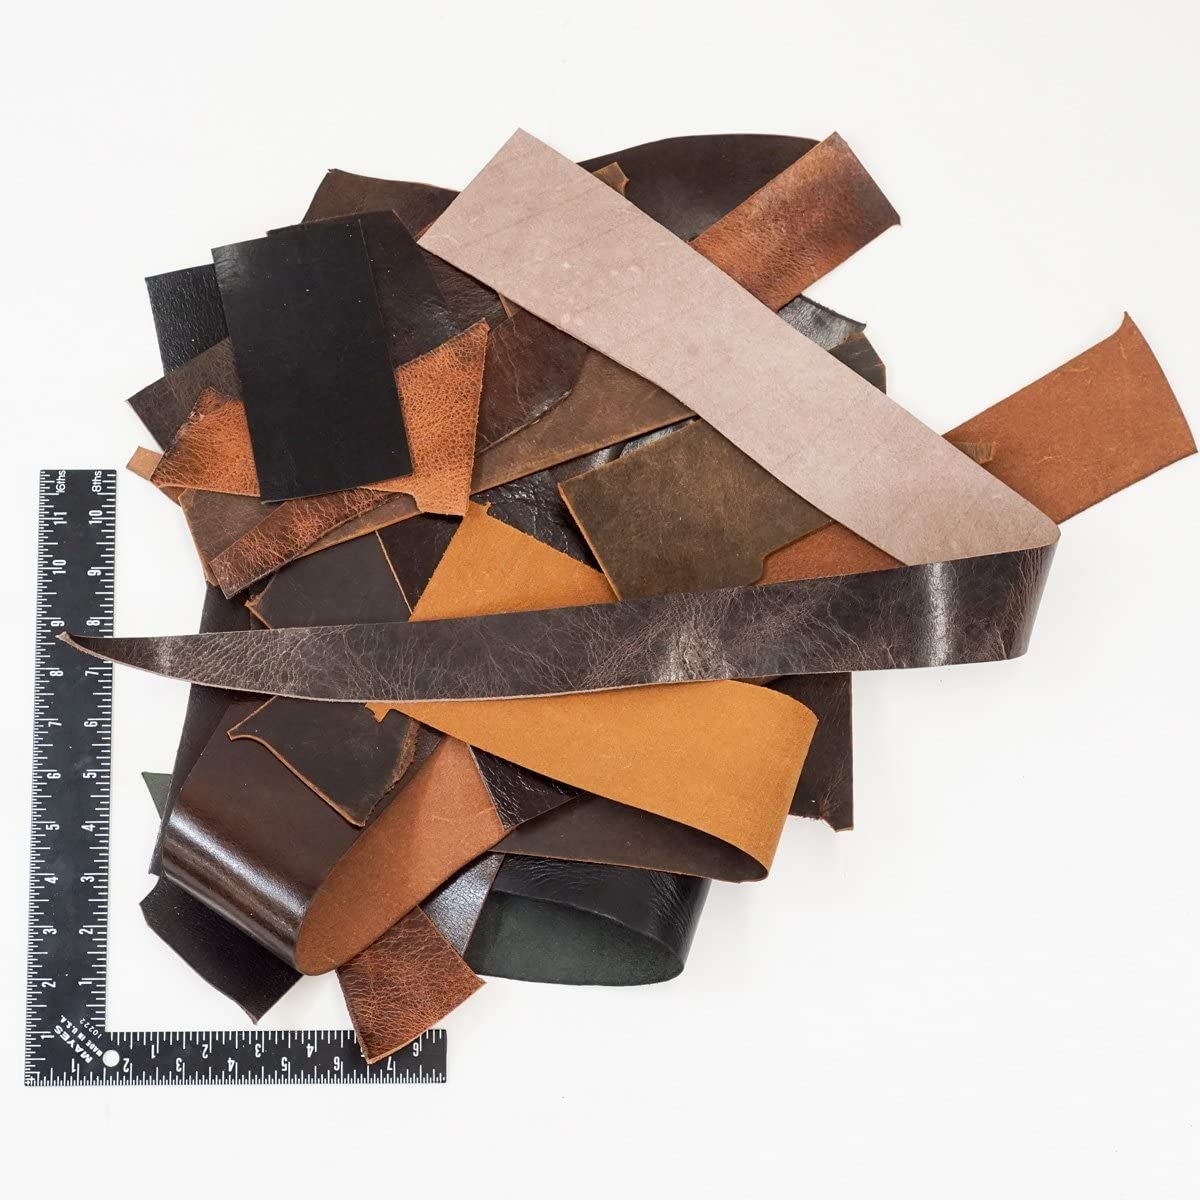 European Leather Work 9-10 oz. (3.6-4mm) Oil-Tanned Leather Scraps